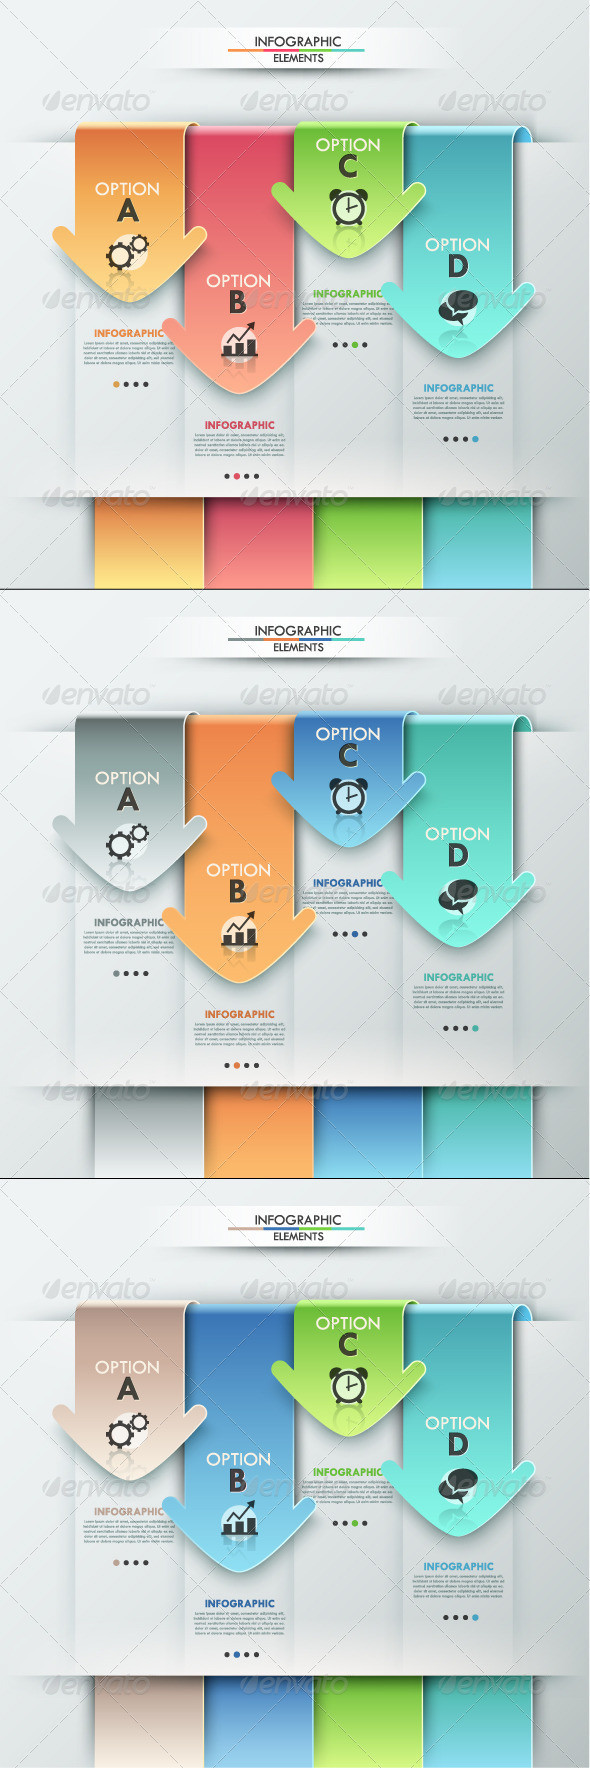 Modern 20infographic 20options 20banner 590x1768